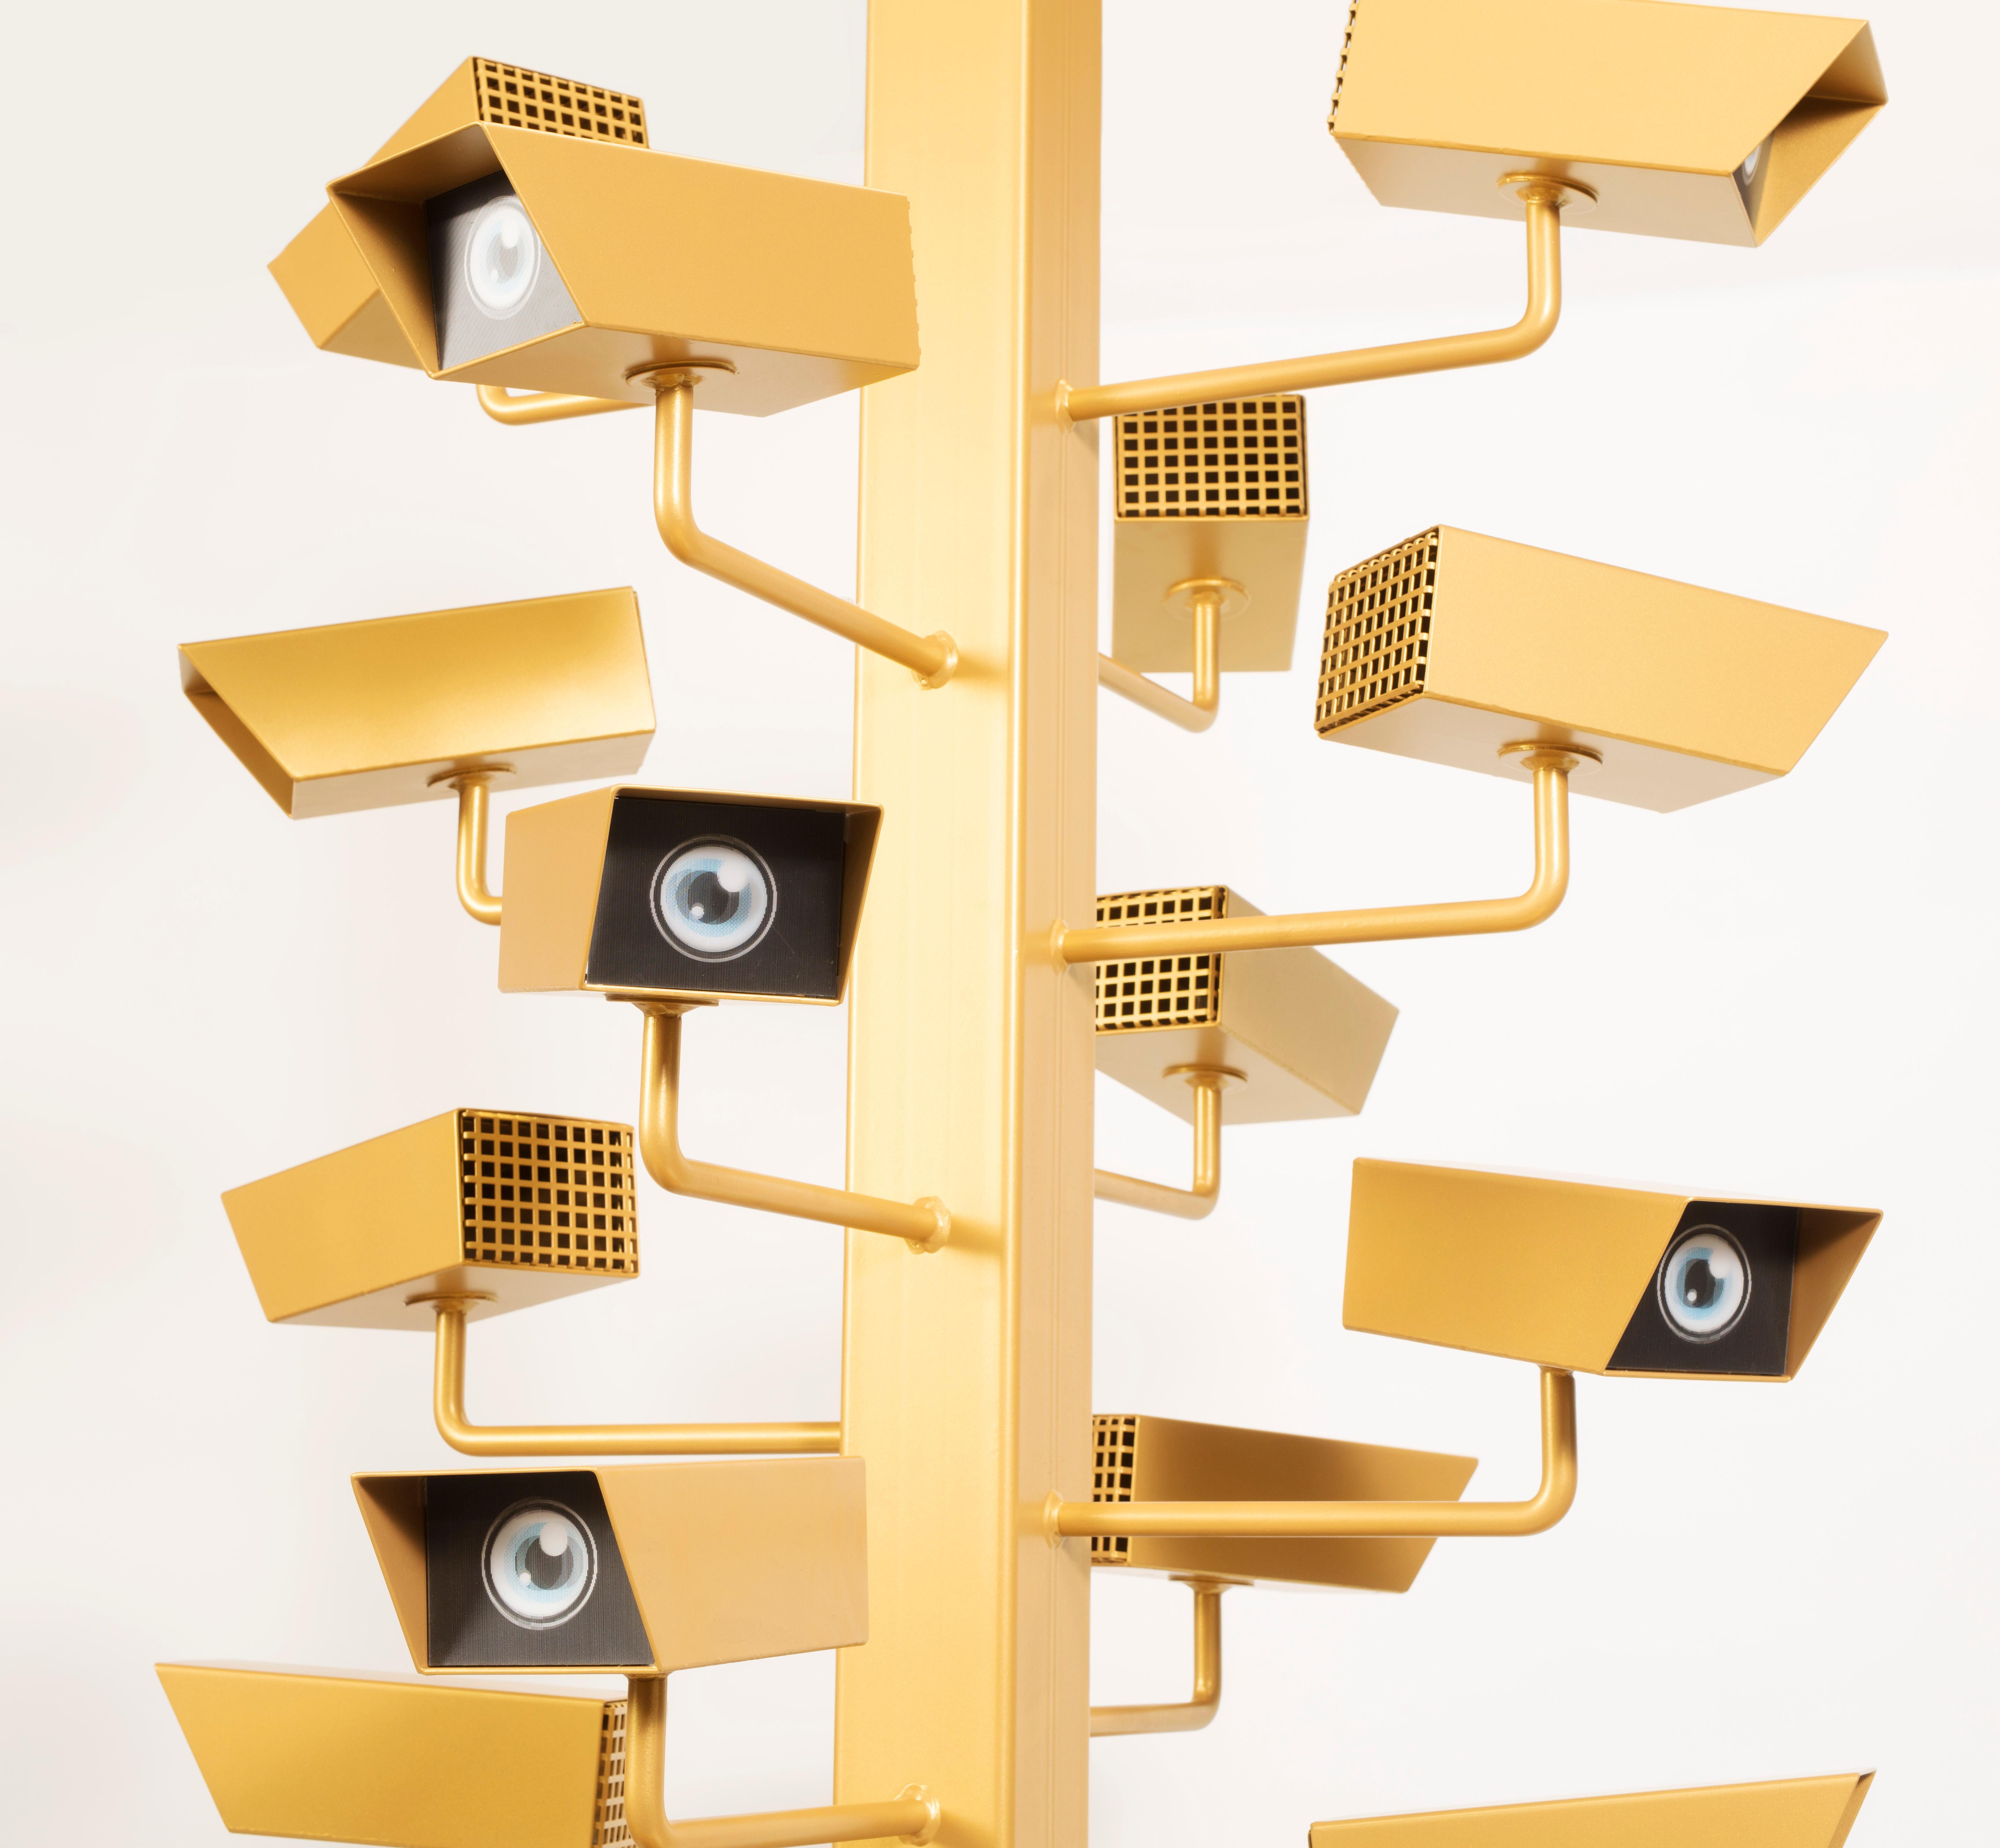 Contemporary 'All eyes on you' steel sculpture (Dutch design, 2018) by Paul&Albert For Sale